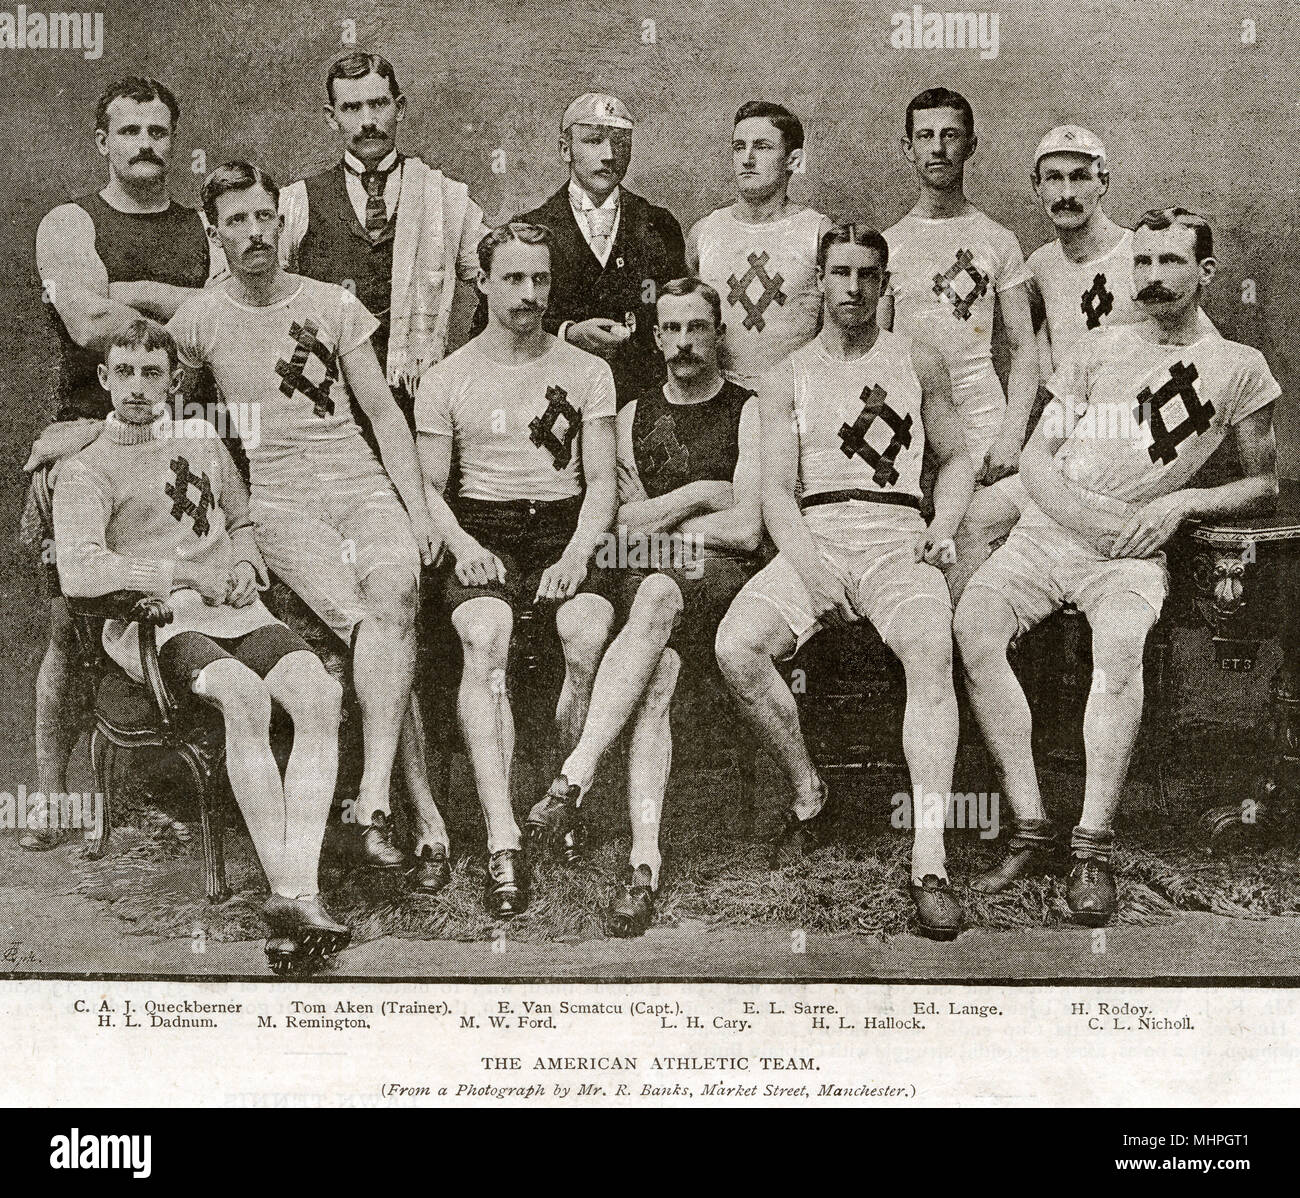 Group photo of the American Athletic Team (Manhattan Athletic Club), during their 1891 tour of England.      Date: 1891 Stock Photo